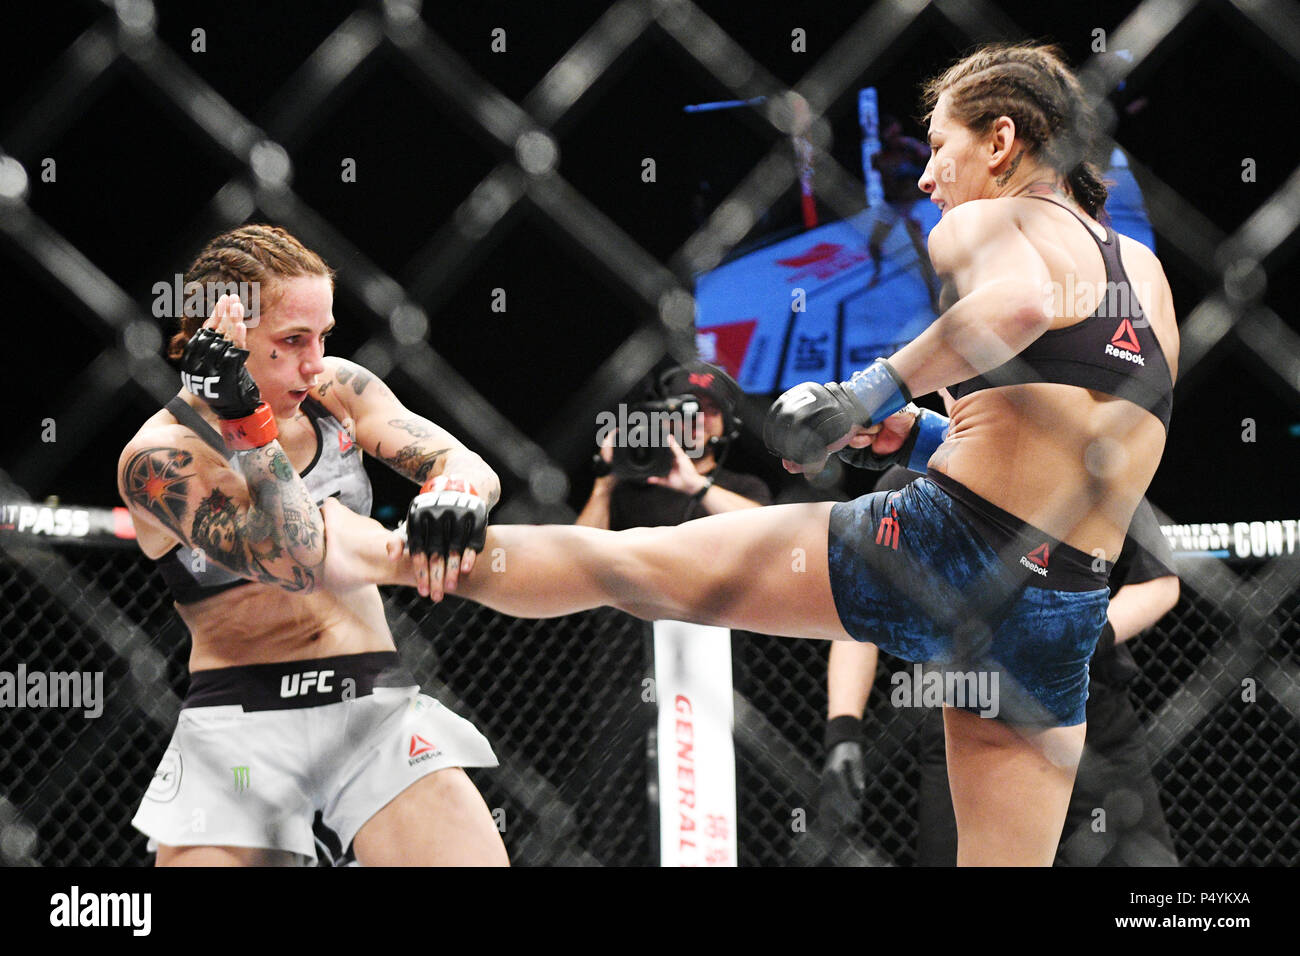 Singapore. 23rd June, 2018. Jessica Eye (R) of the United States fights with Jessica-Rose Clark of Australia during the flyweight bout at the Ultimate Fighting Championship (UFC) in Singapore June 23, 2018. Credit: Then Chih Wey/Xinhua/Alamy Live News Stock Photo